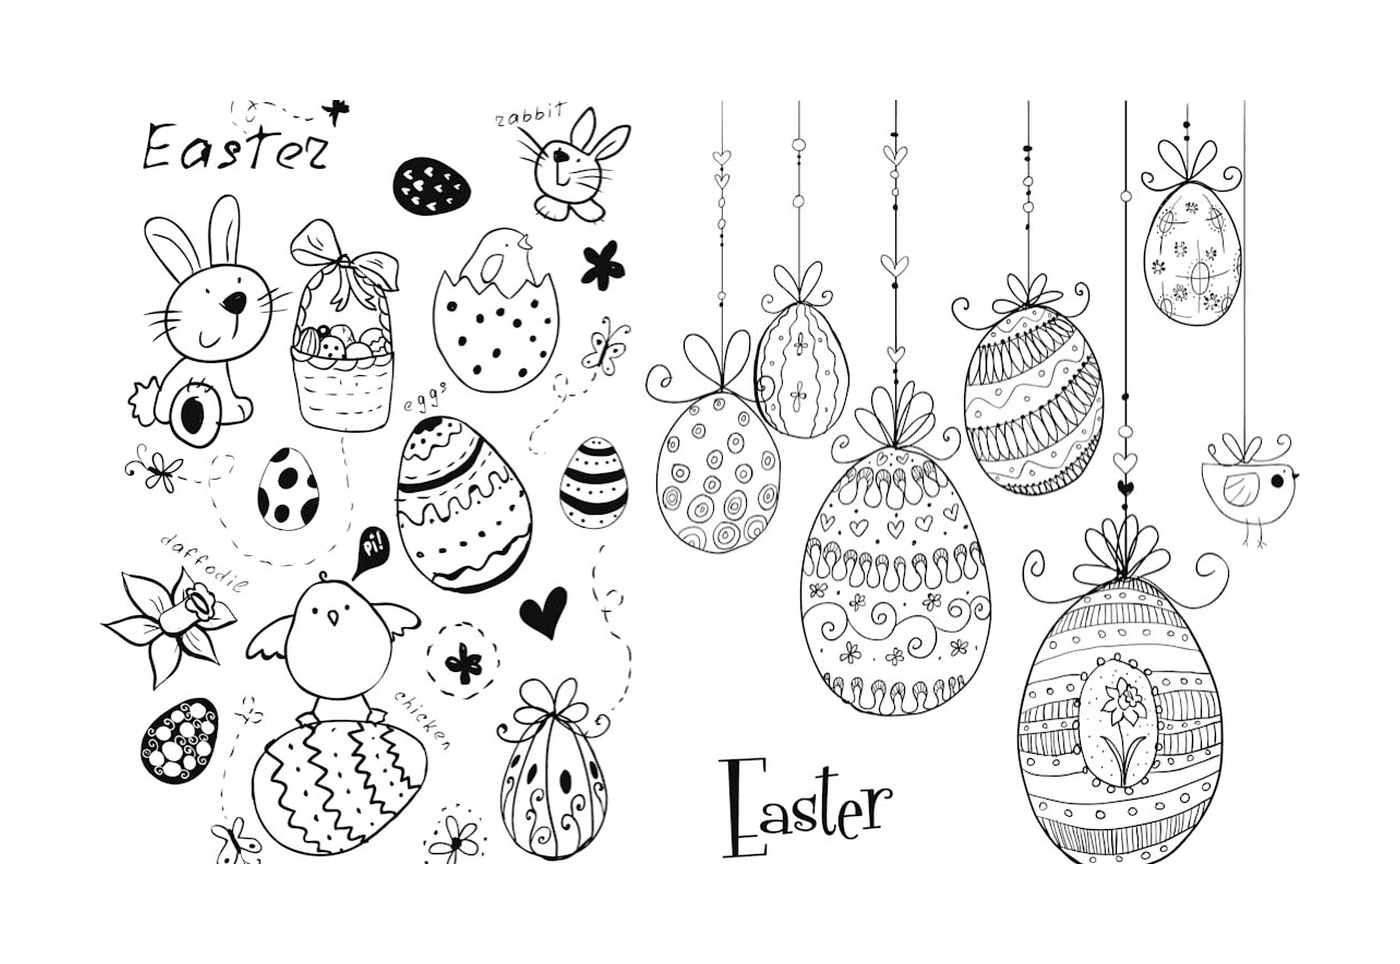 Easter Doodles: eggs and rabbits